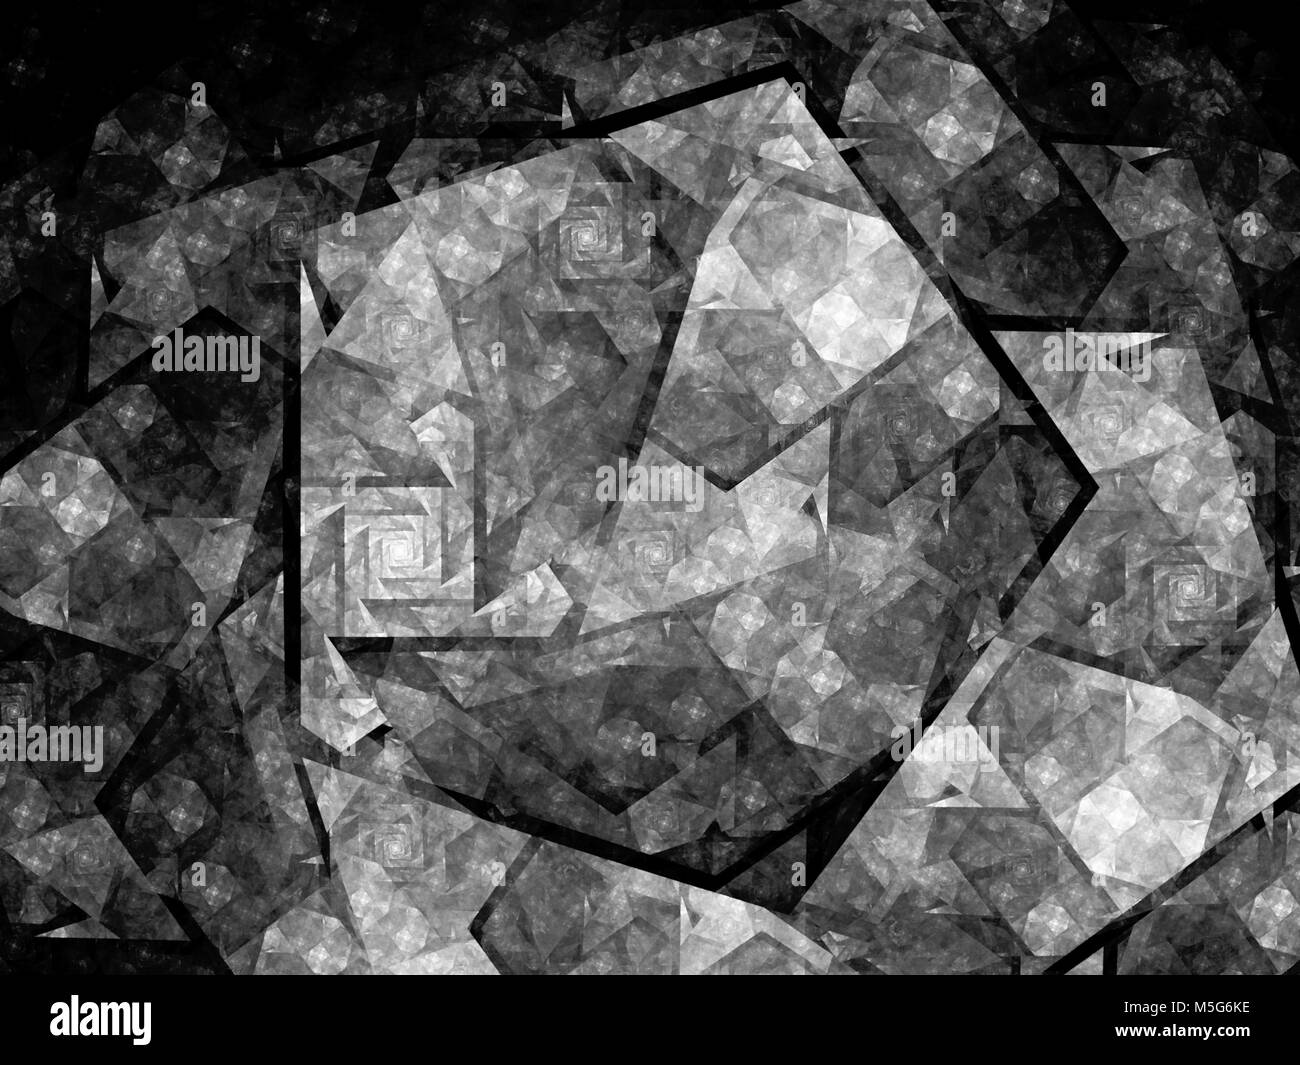 Pentagon shaped nanocrystal fractal, black and white, computer generated abstract texture for overlay or screen effect, 3D rendering Stock Photo